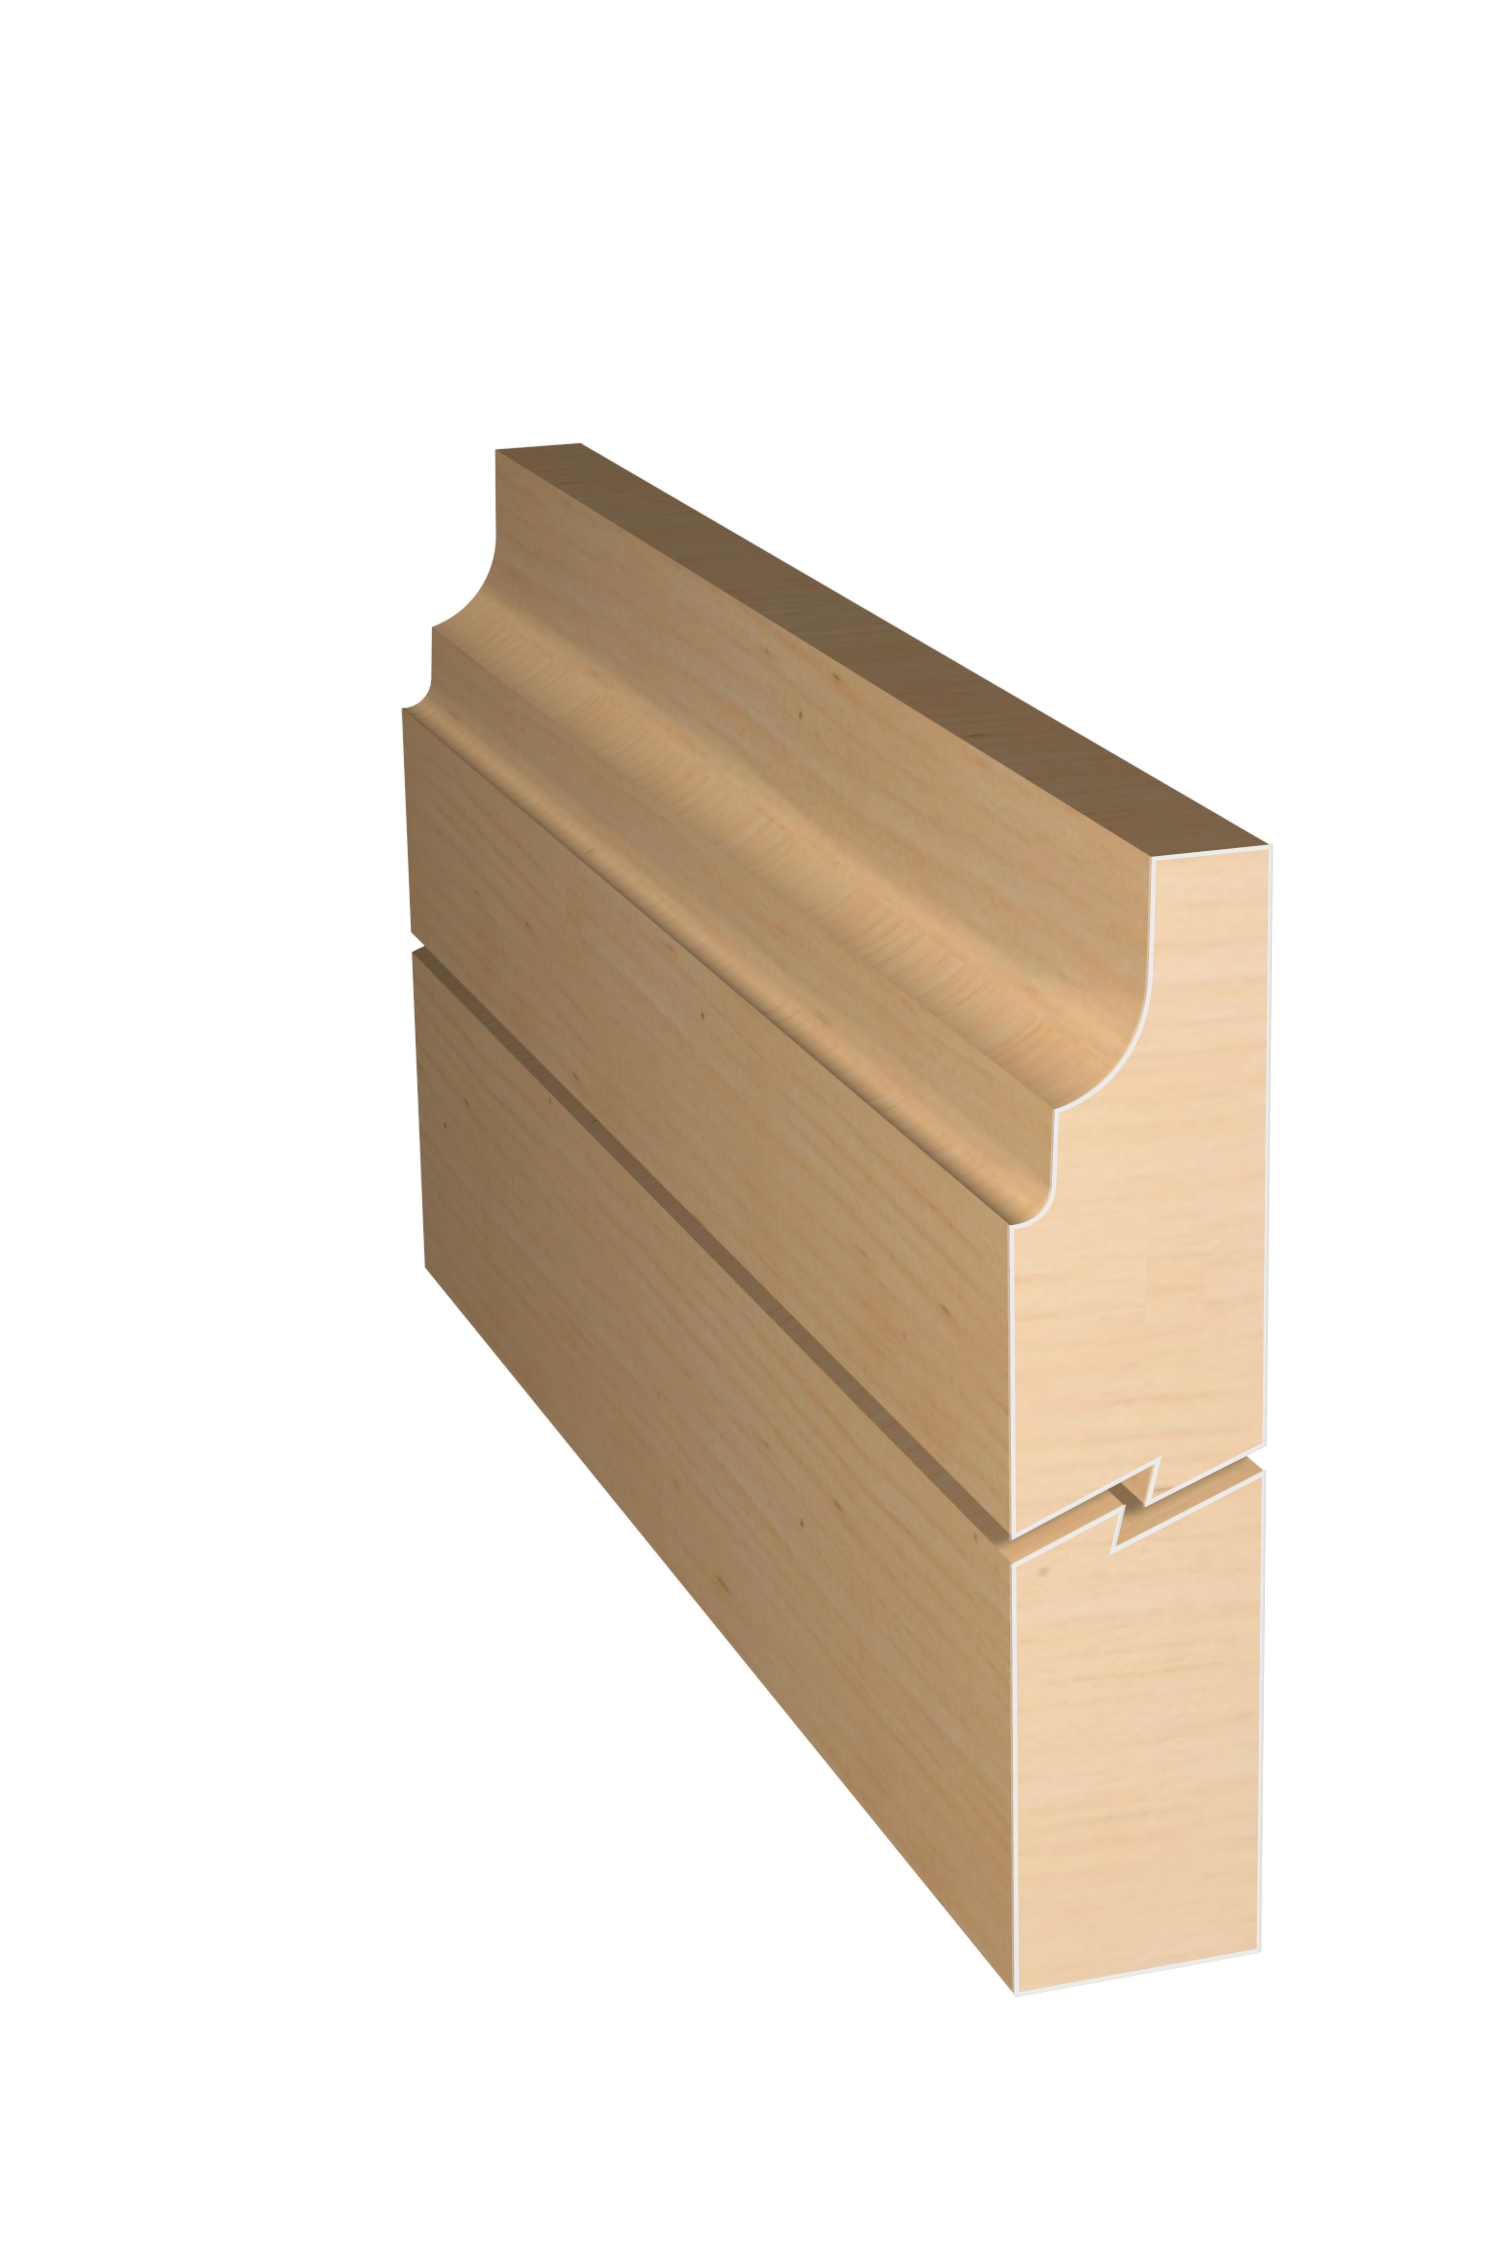 Three dimensional rendering of custom edge profile wood molding SKPL23 made by Public Lumber Company in Detroit.